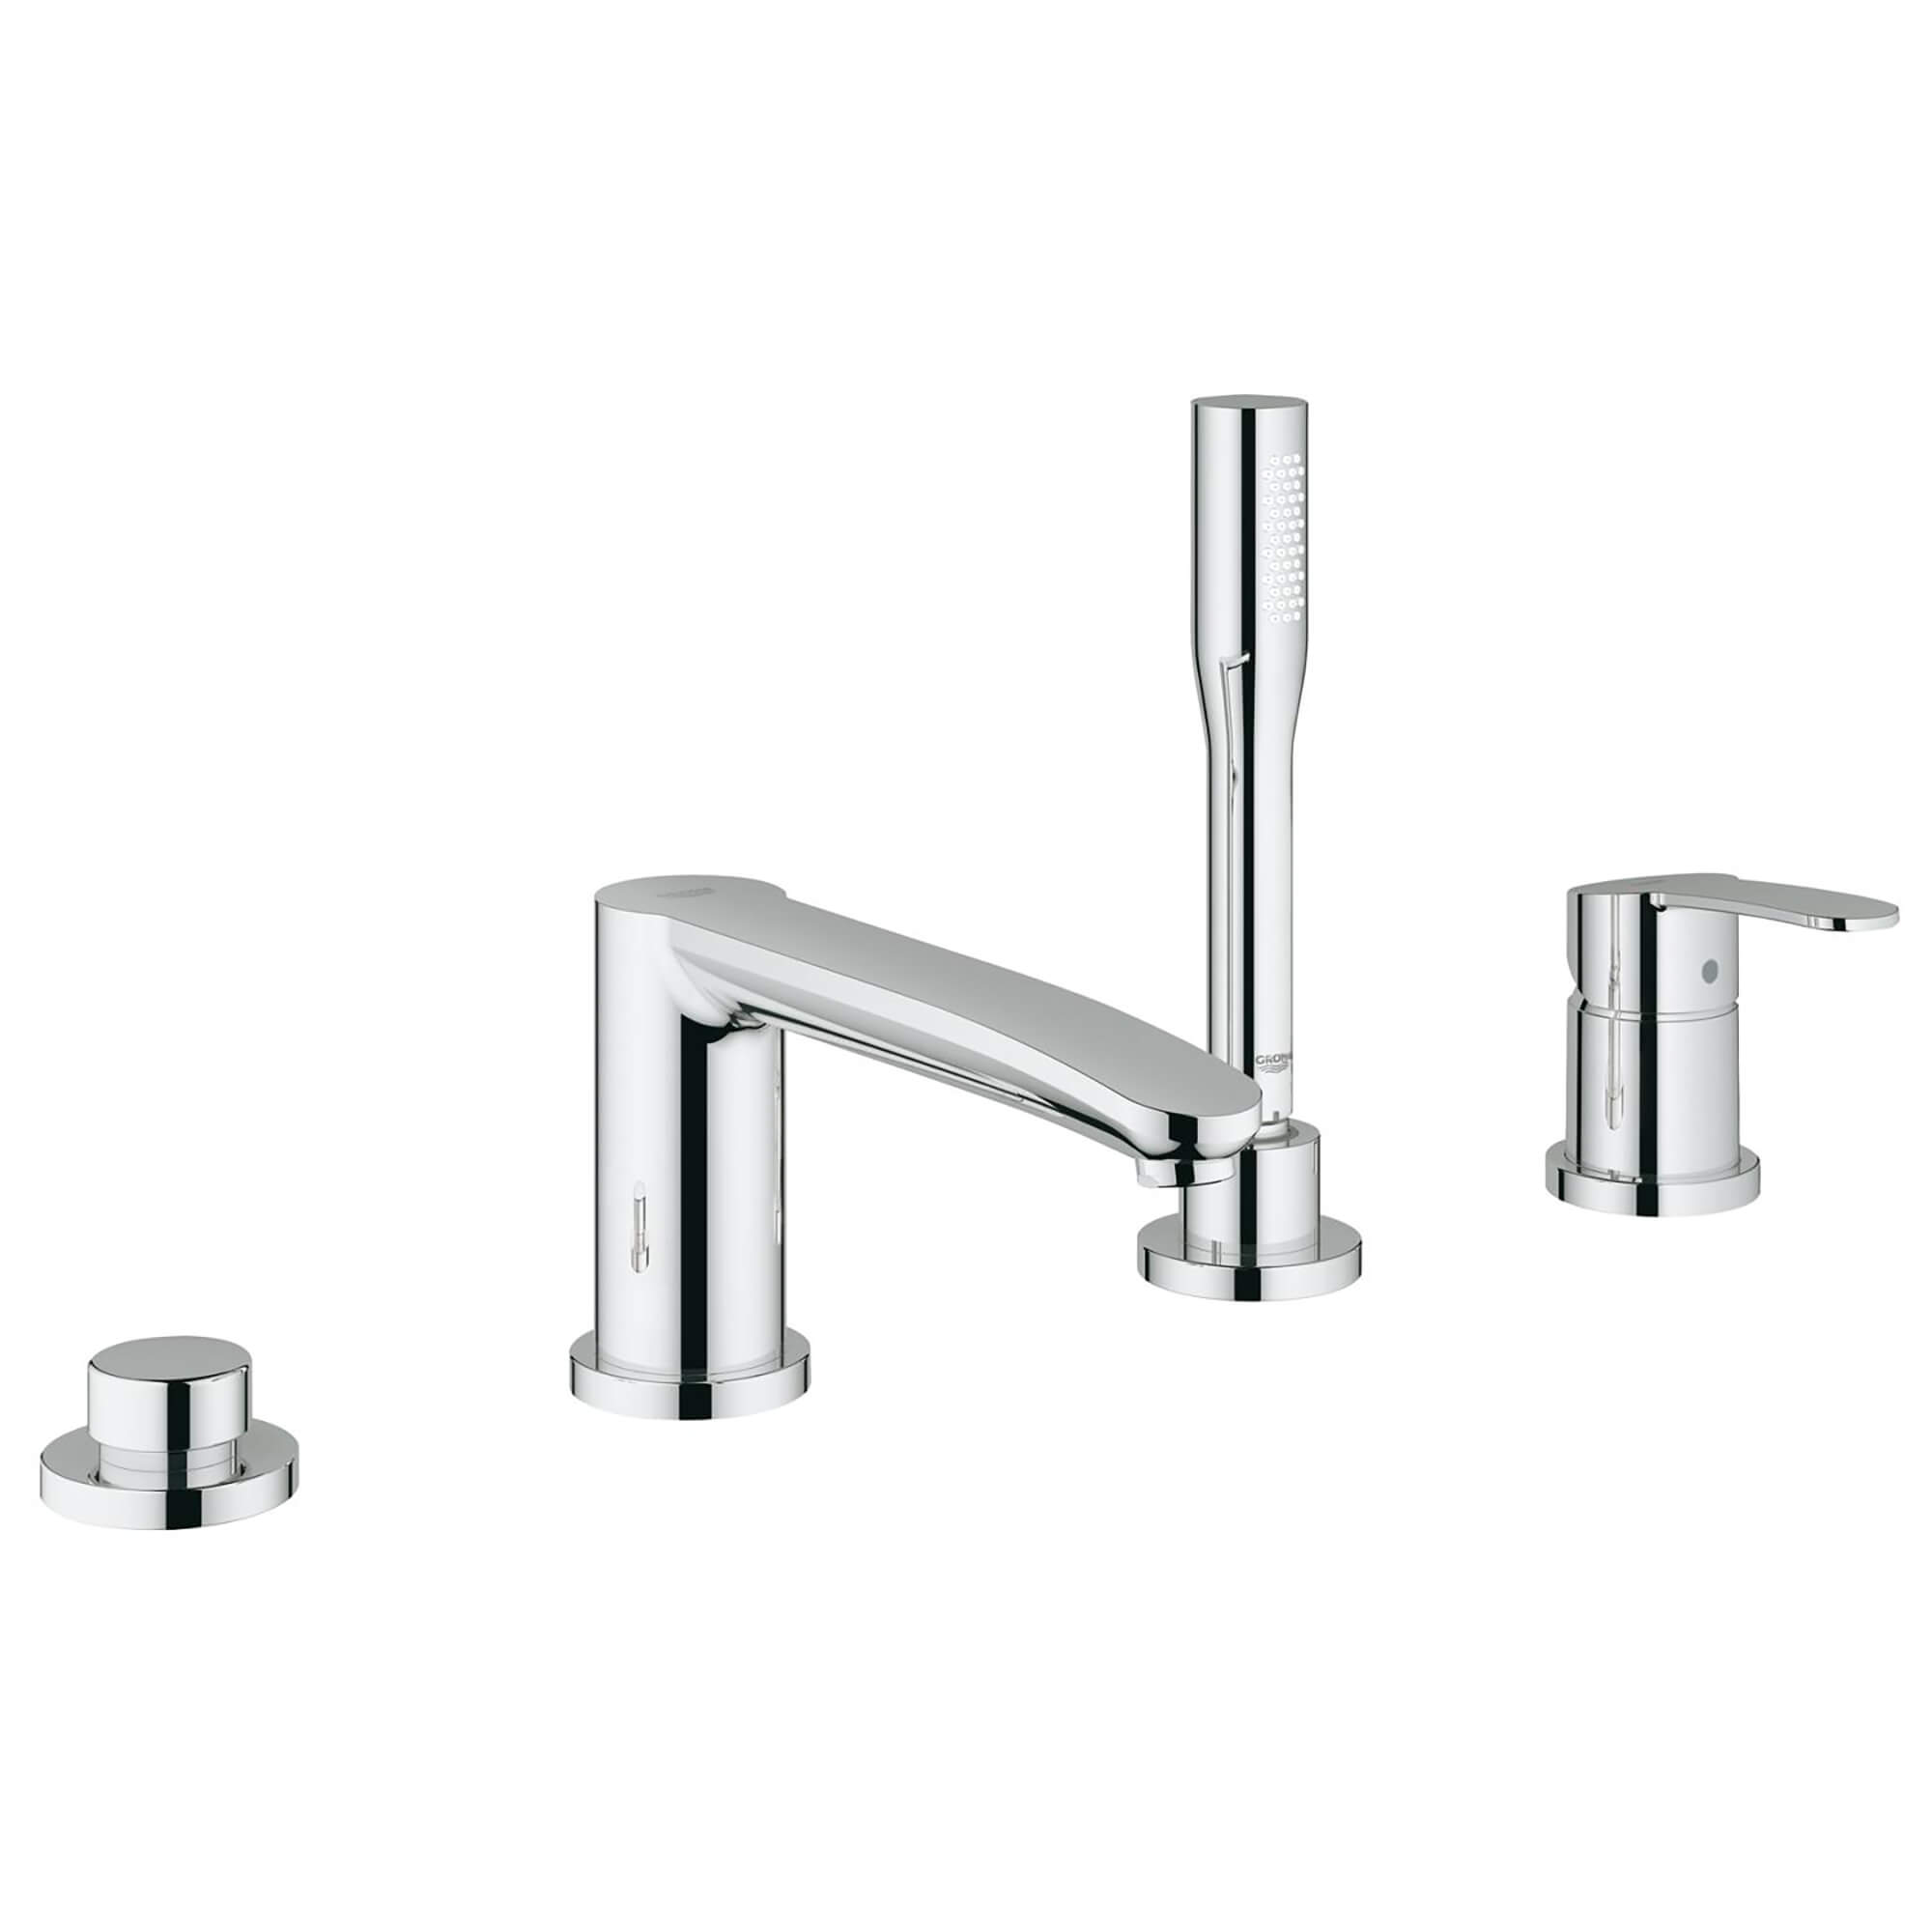 Eurostyle Cosmopolitan Roman Tub Filler With Personal Hand Shower